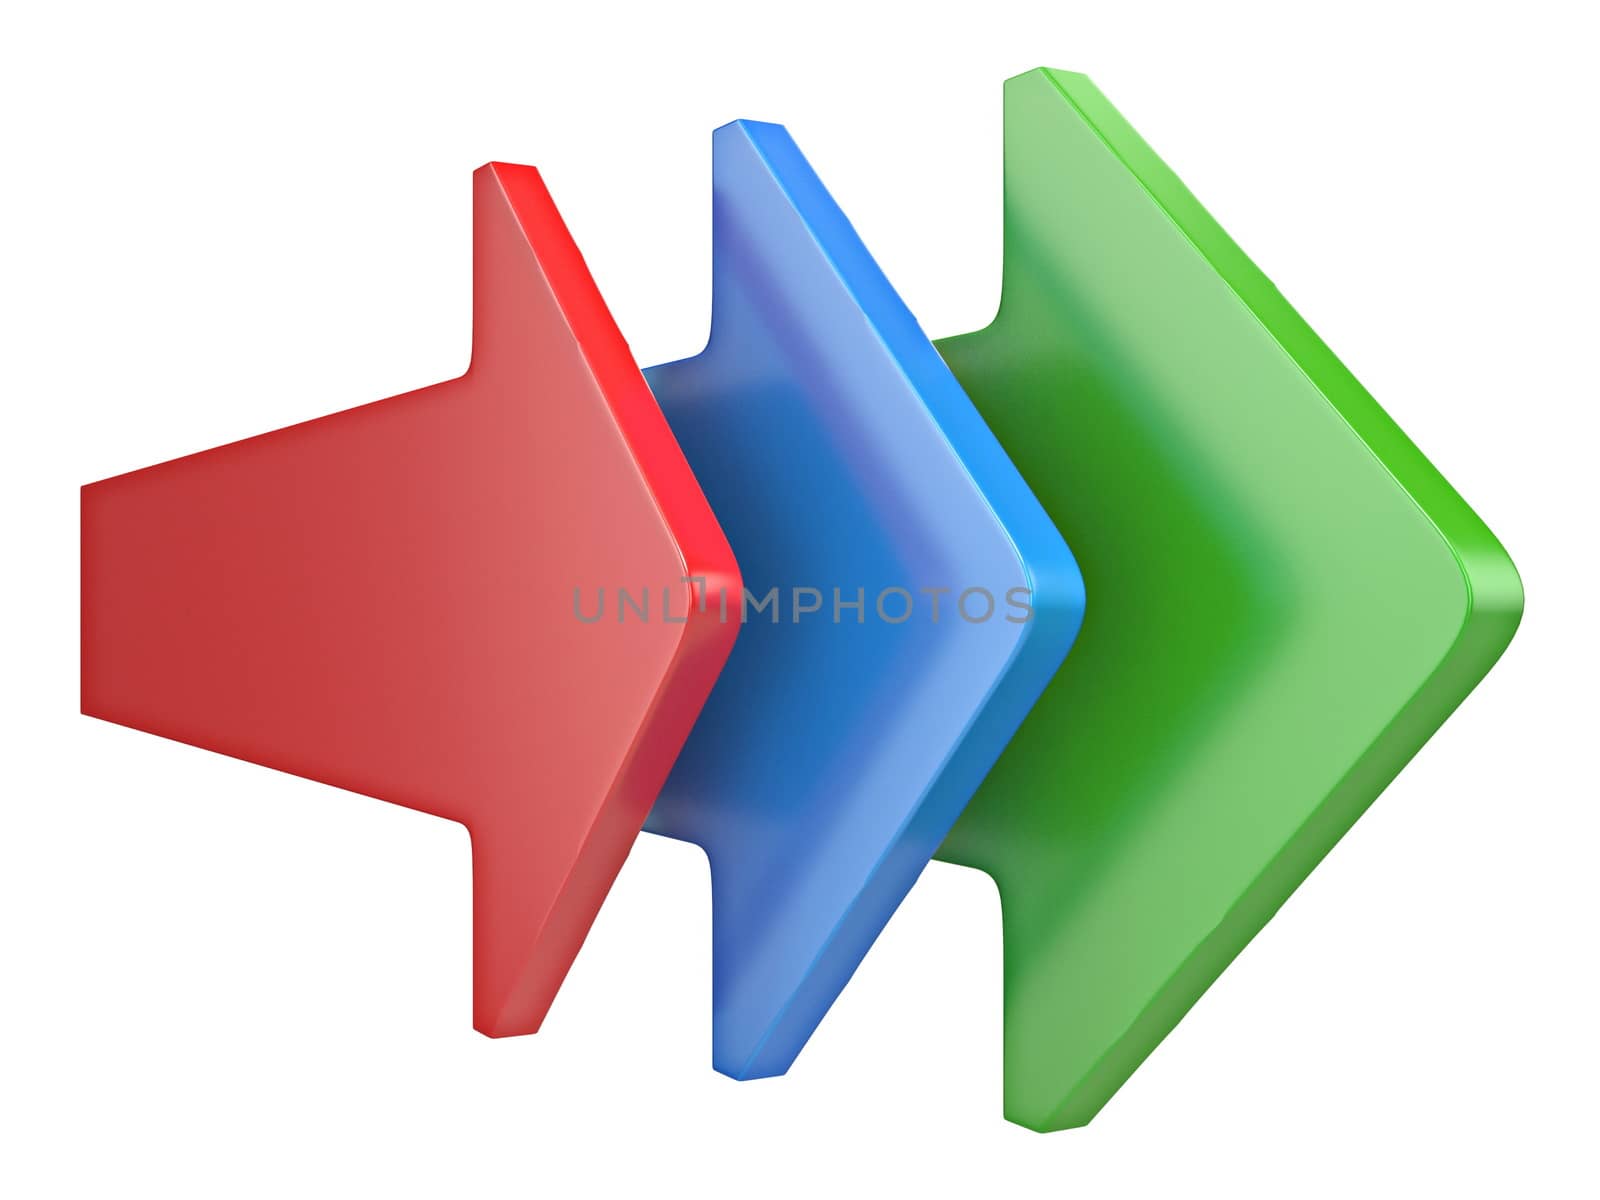 Three arrows showing same directions 3D rendering illustration isolated on white background